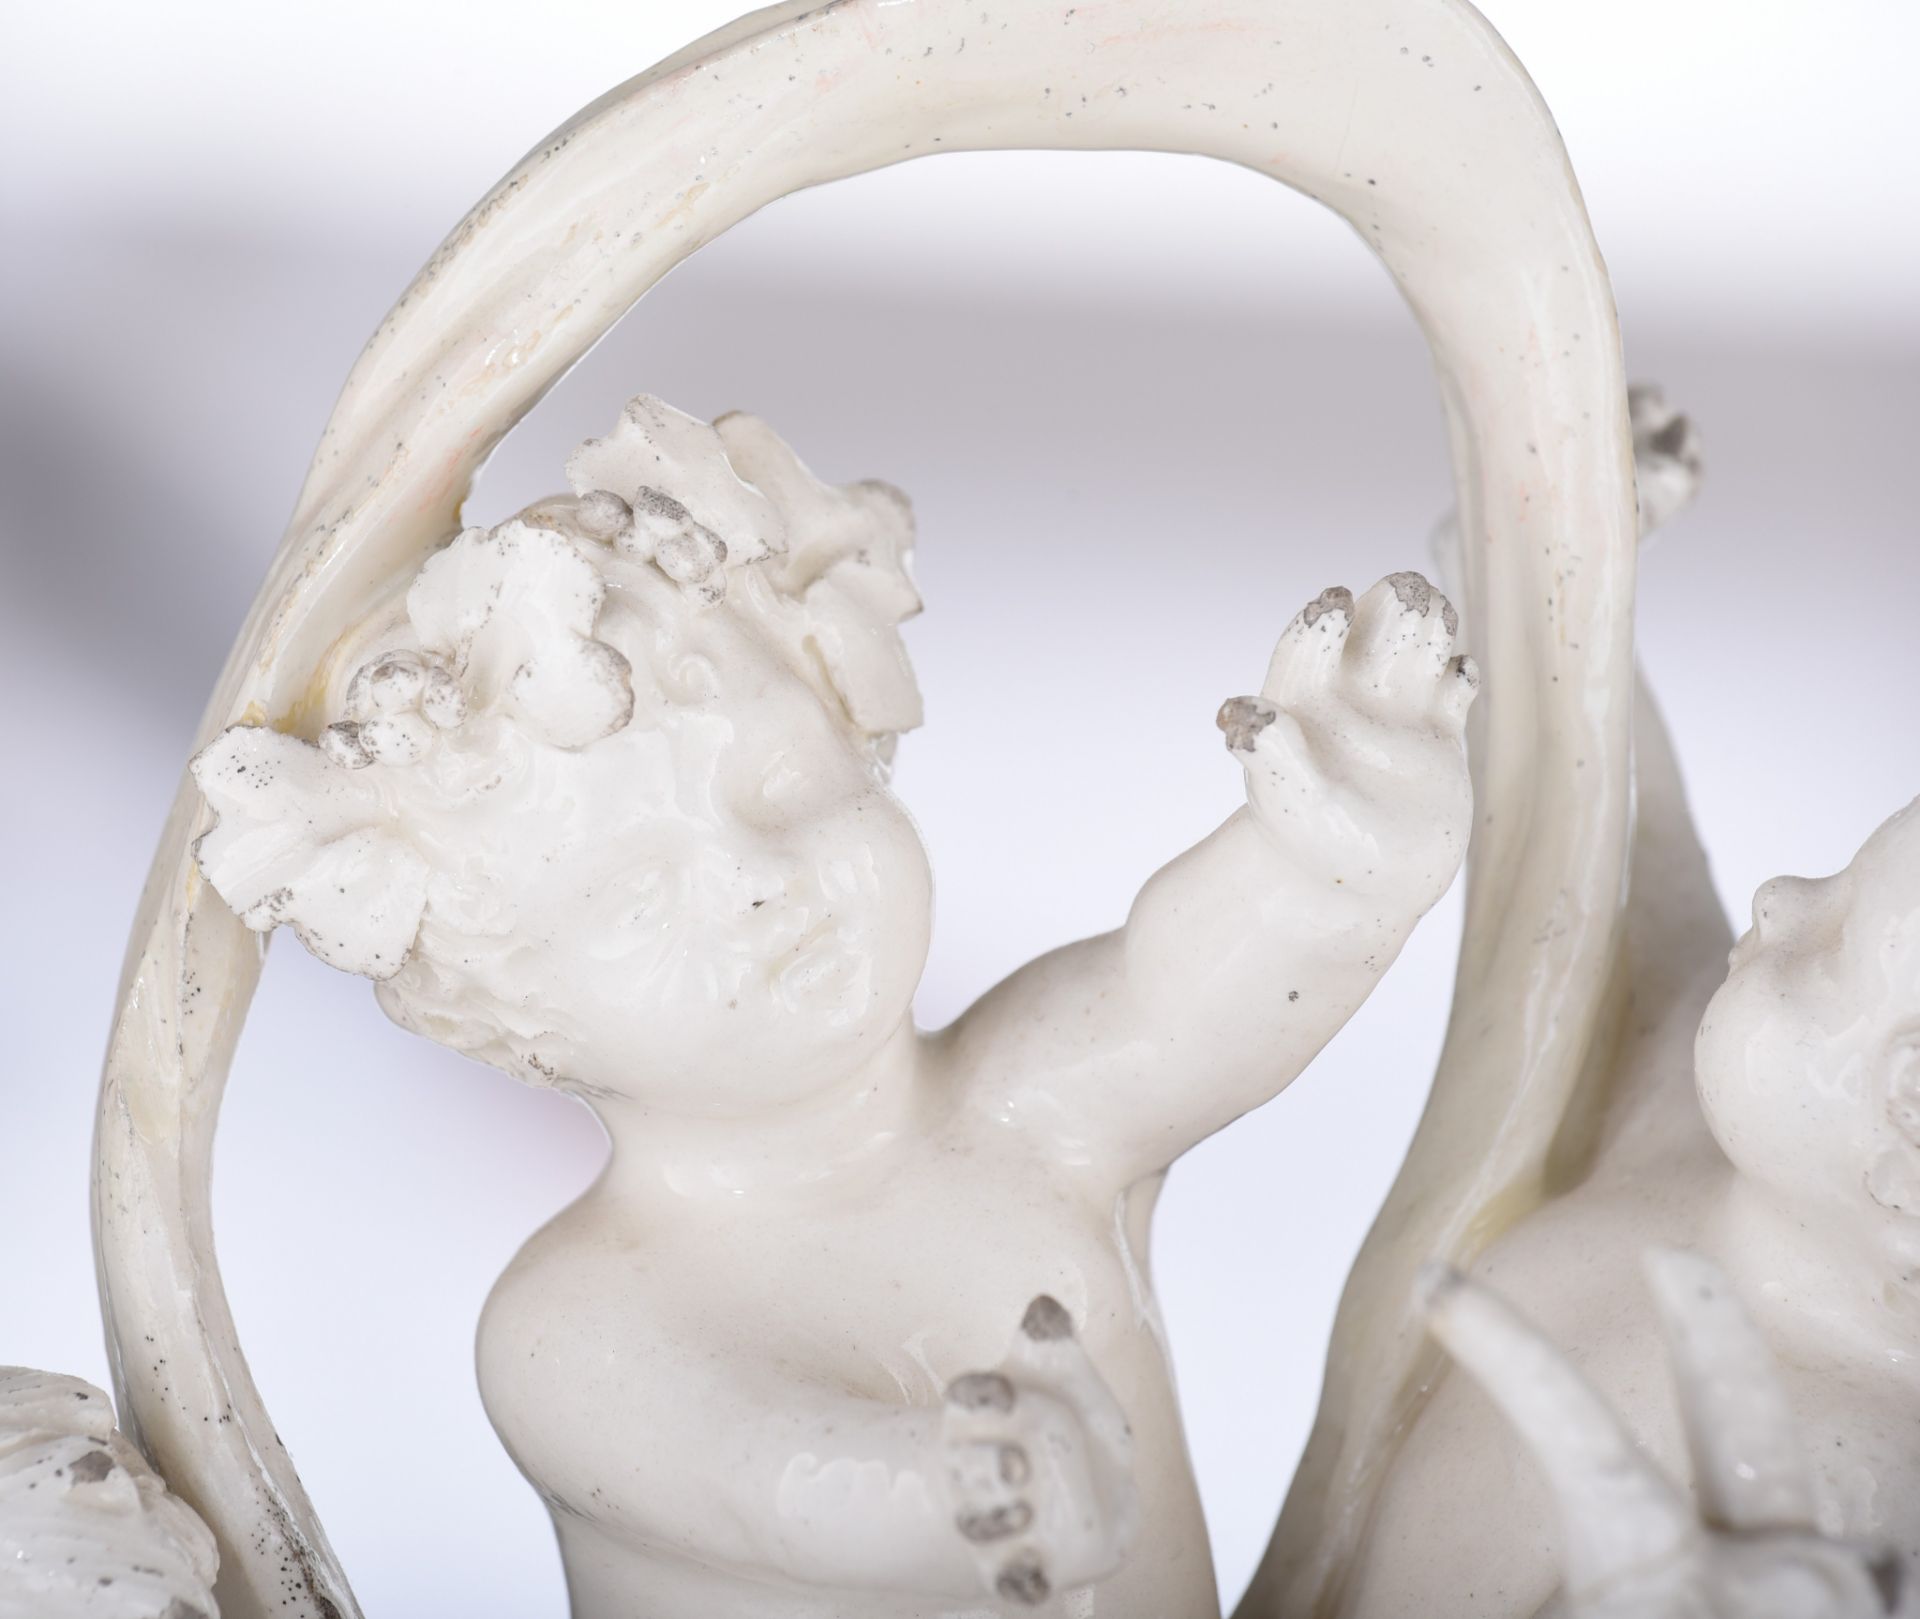 (BIDDING ONLY ON CARLOBONTE.BE) Two white glazed Capodimonte figural groups, Naples, H 20 - 23 cm - Image 10 of 16